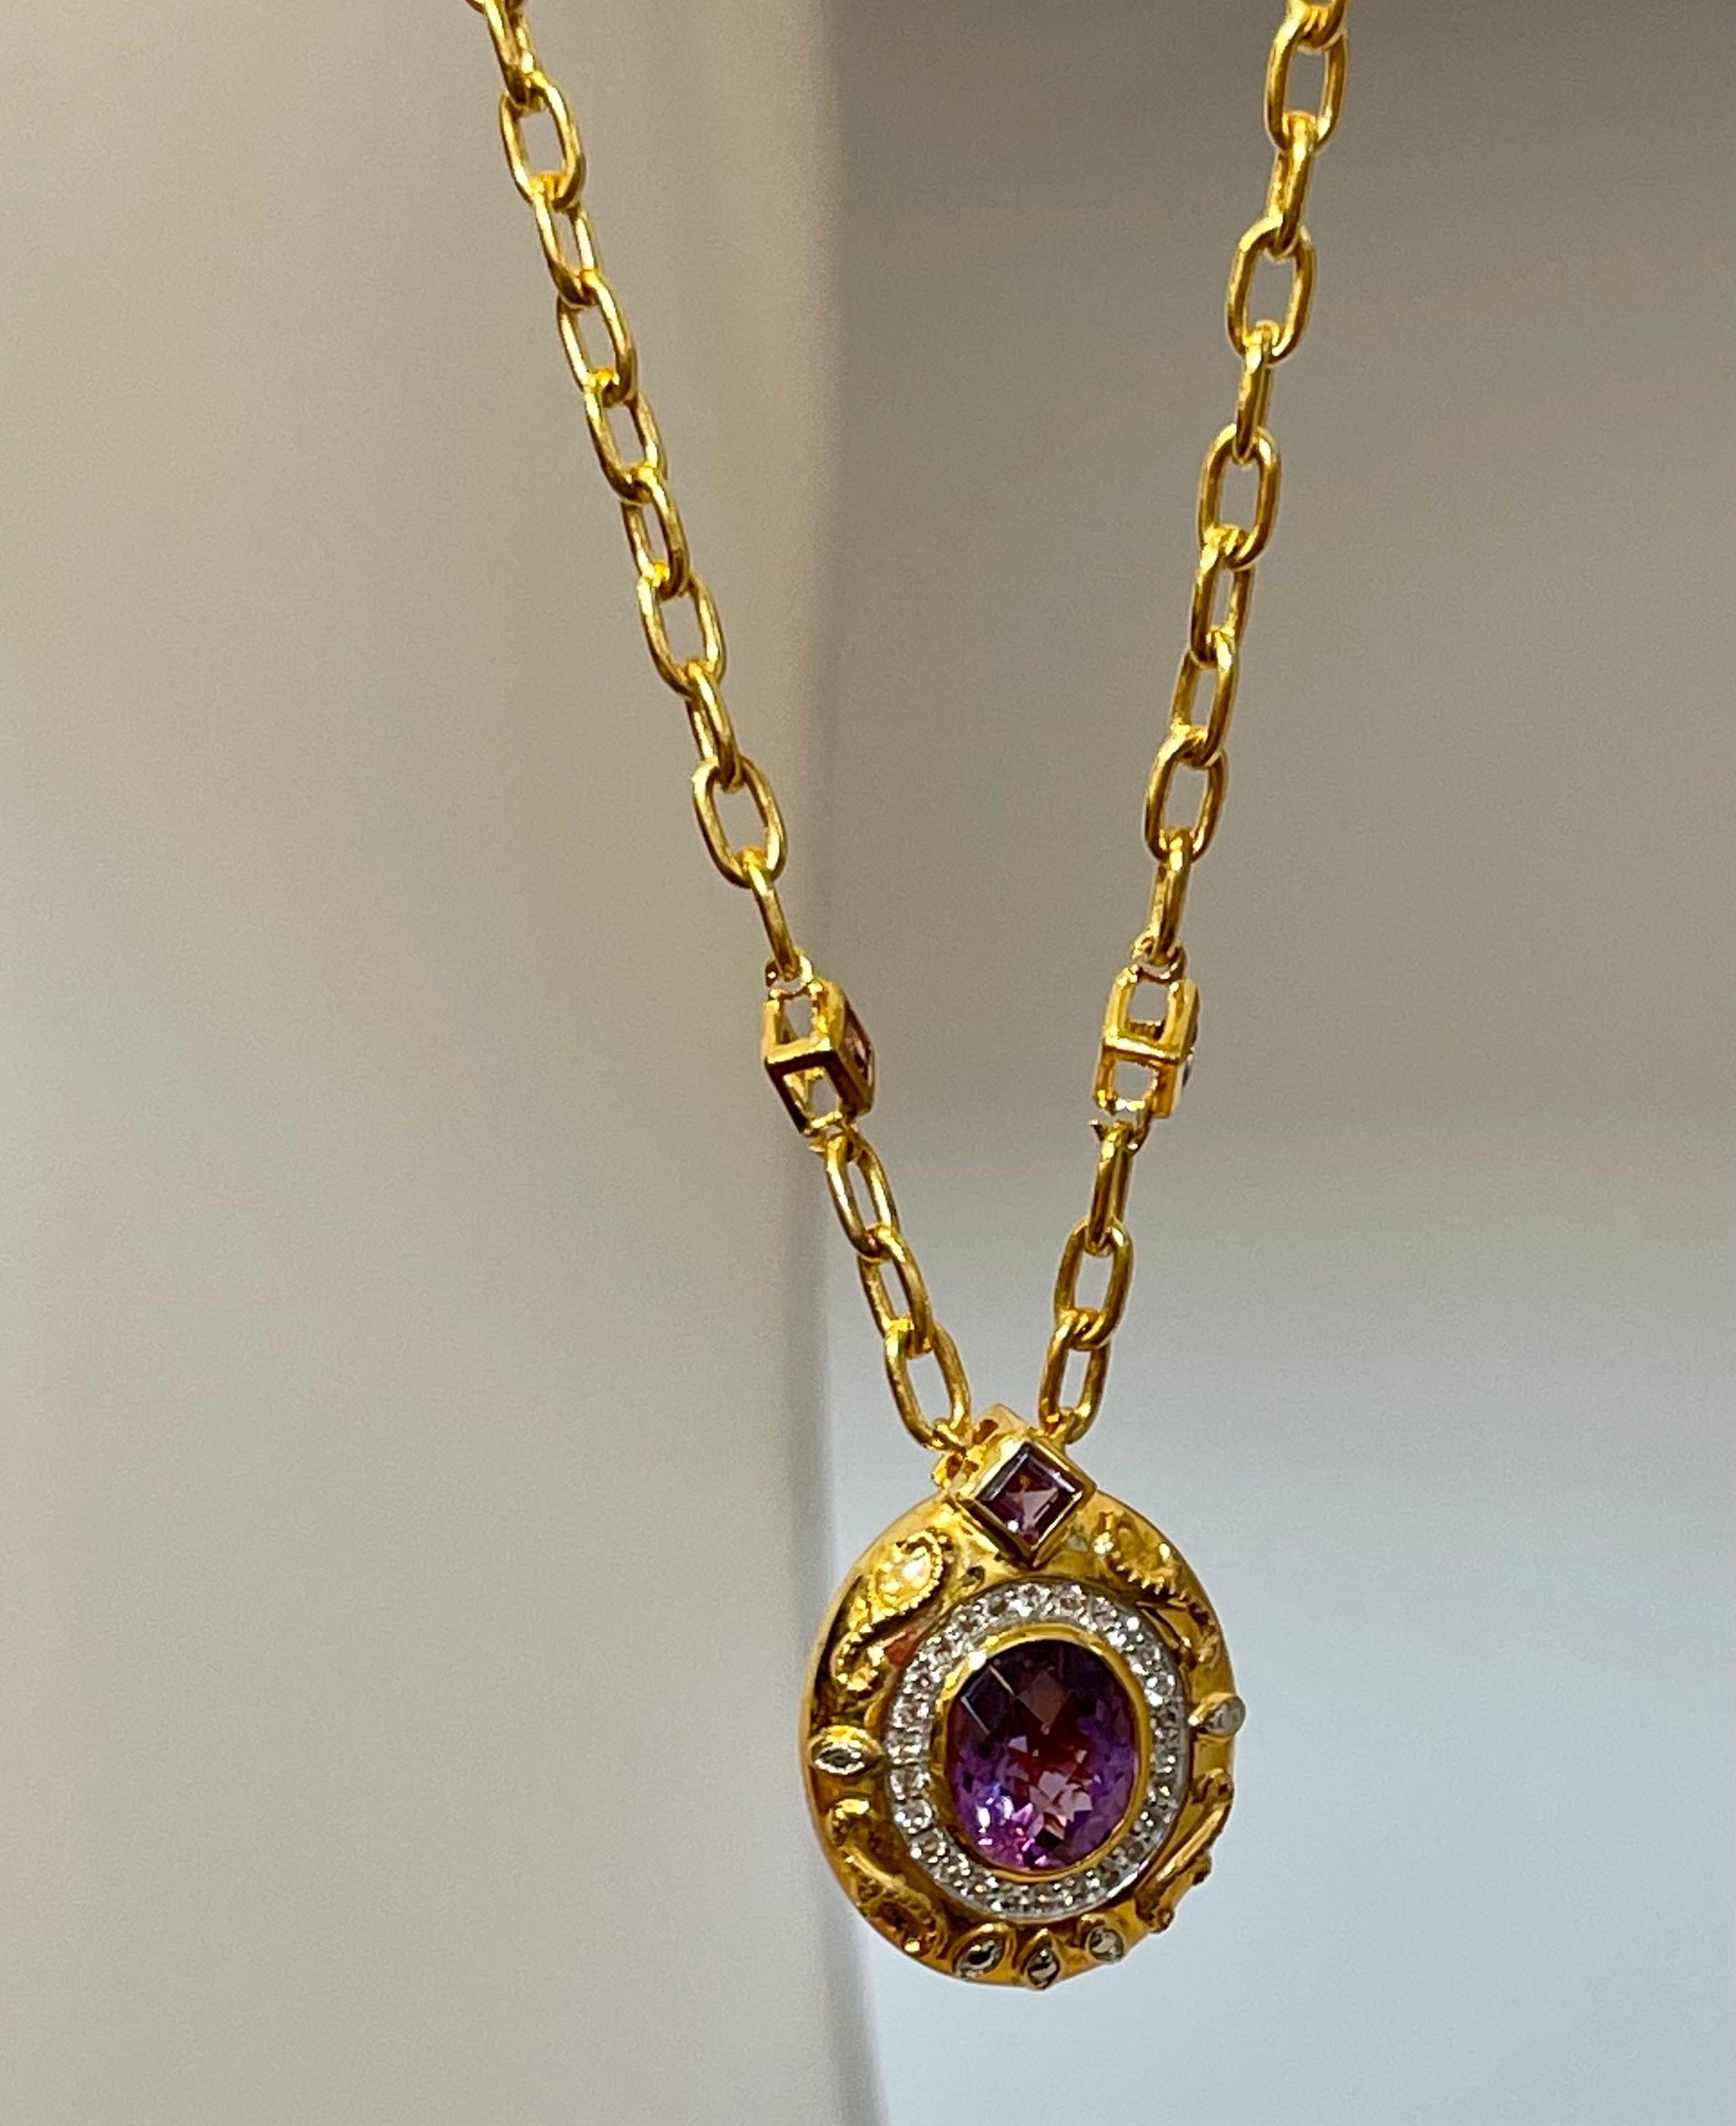 Women's Timeless Elegance Sterling Silver Necklace With Gold Polish Amethyst &  WH Topaz